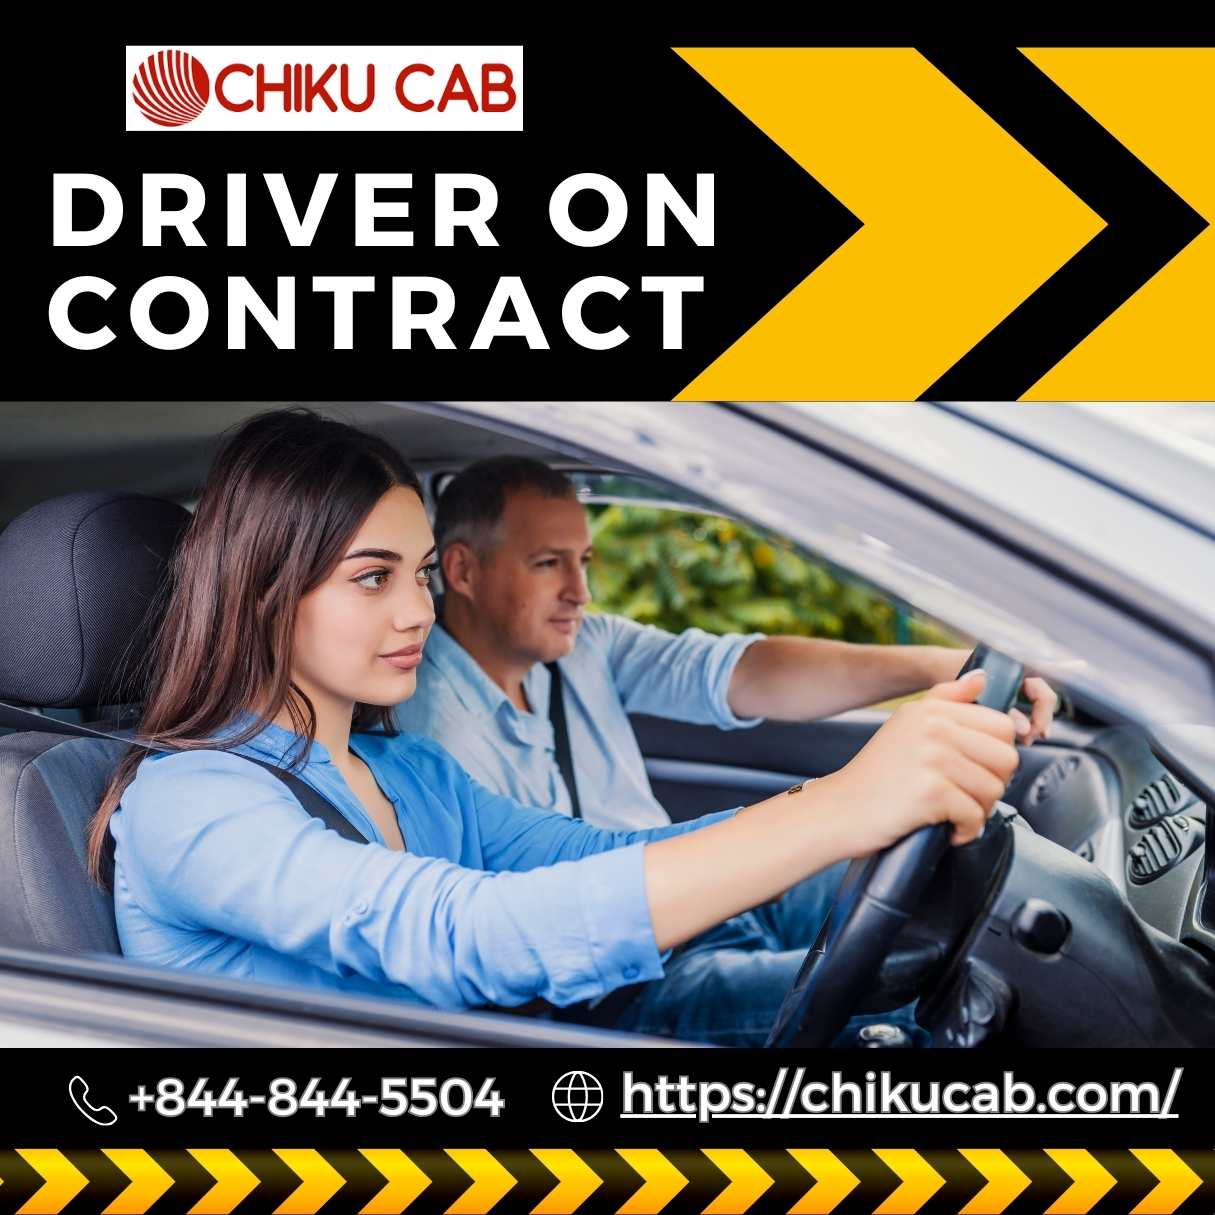 ChikuCab fulfills your driver on Contract